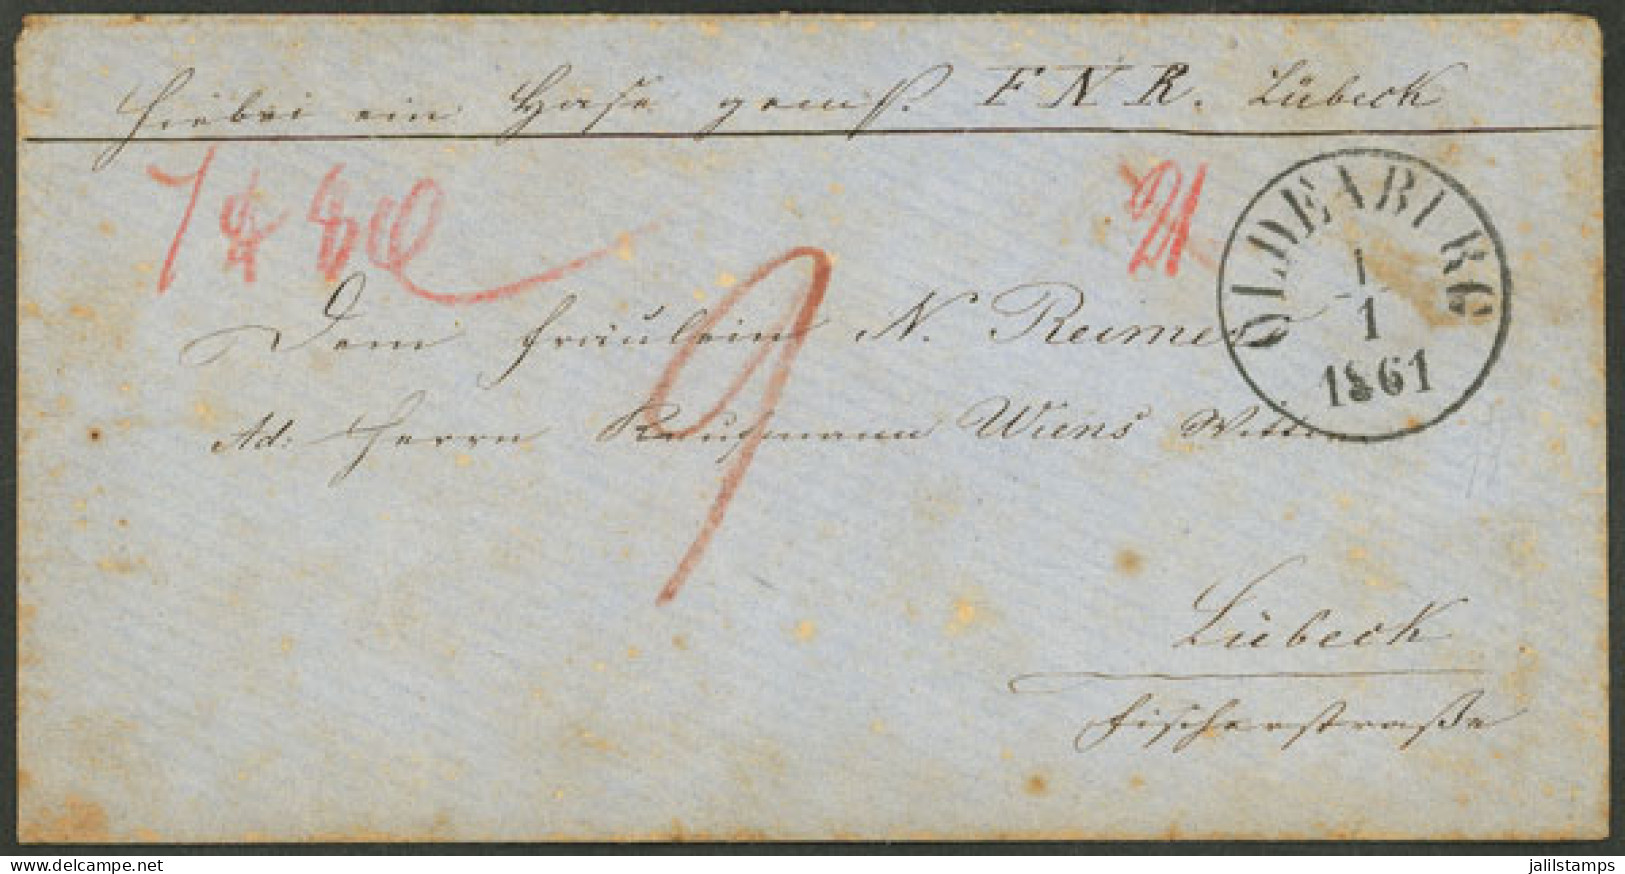 GERMANY: 1/JA/1861 Oldenburg - Lübeck, Cover Without Postage, With Nice Cancels And Interesting Hand-written Marks! - Briefe U. Dokumente